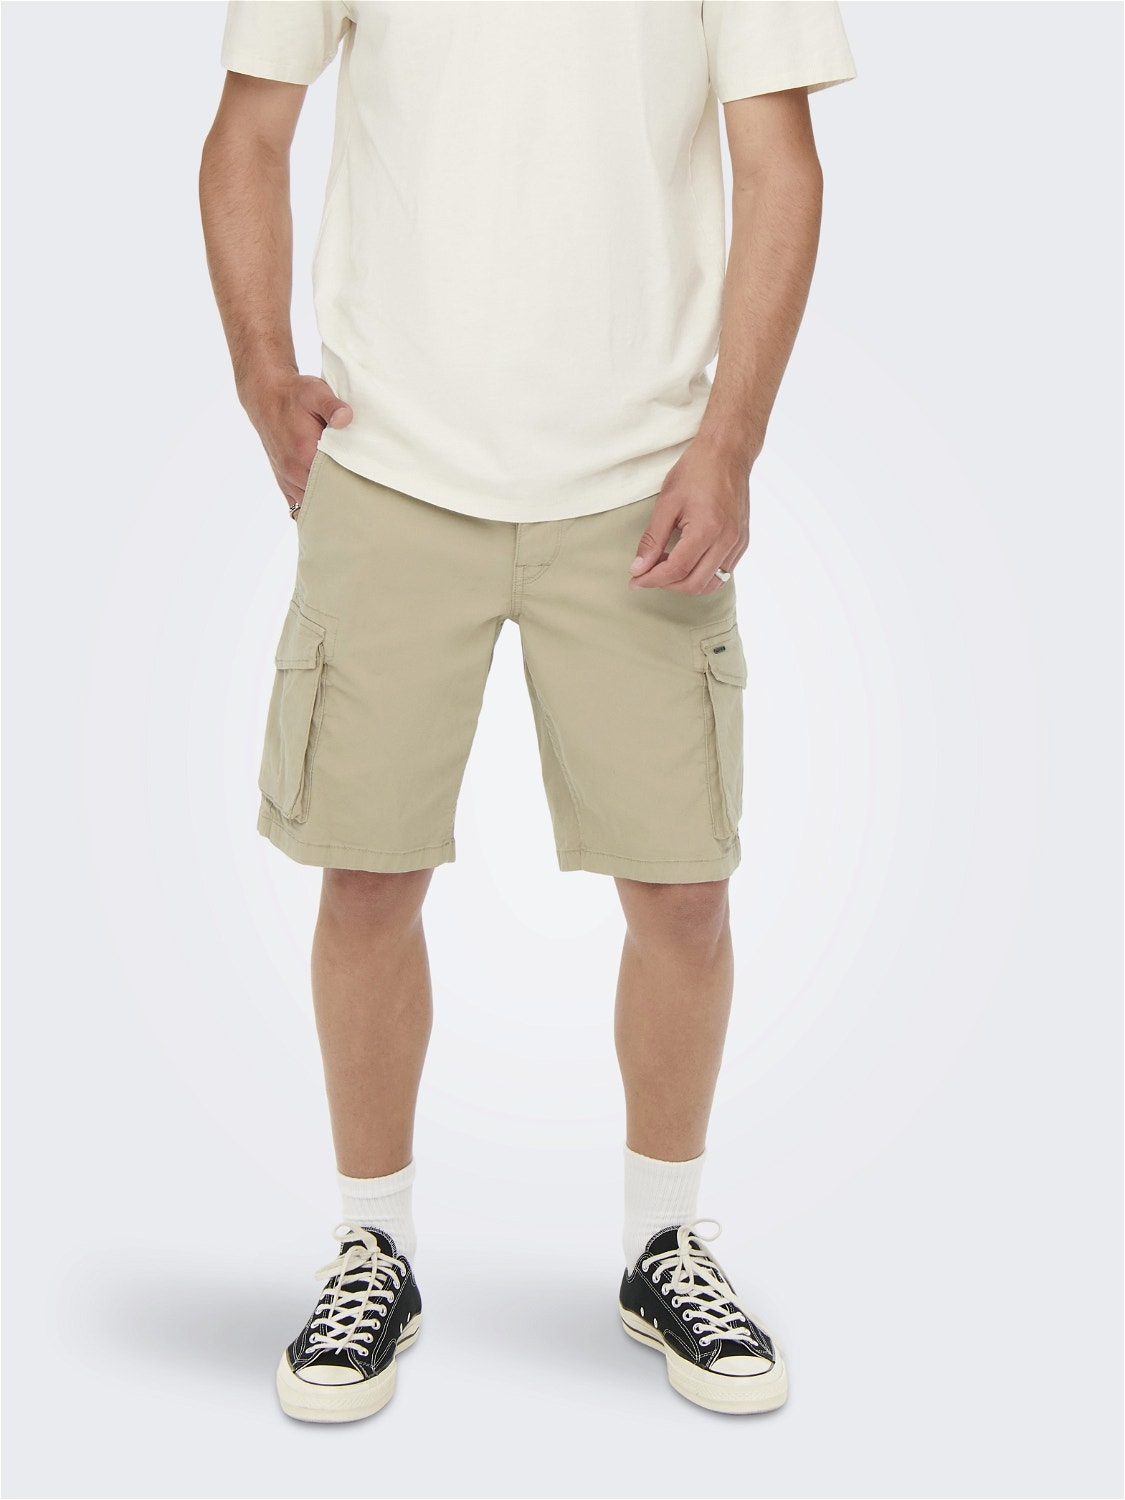 ONLY & SONS Shorts cargo Regular Fit -Chinchilla - 22021459